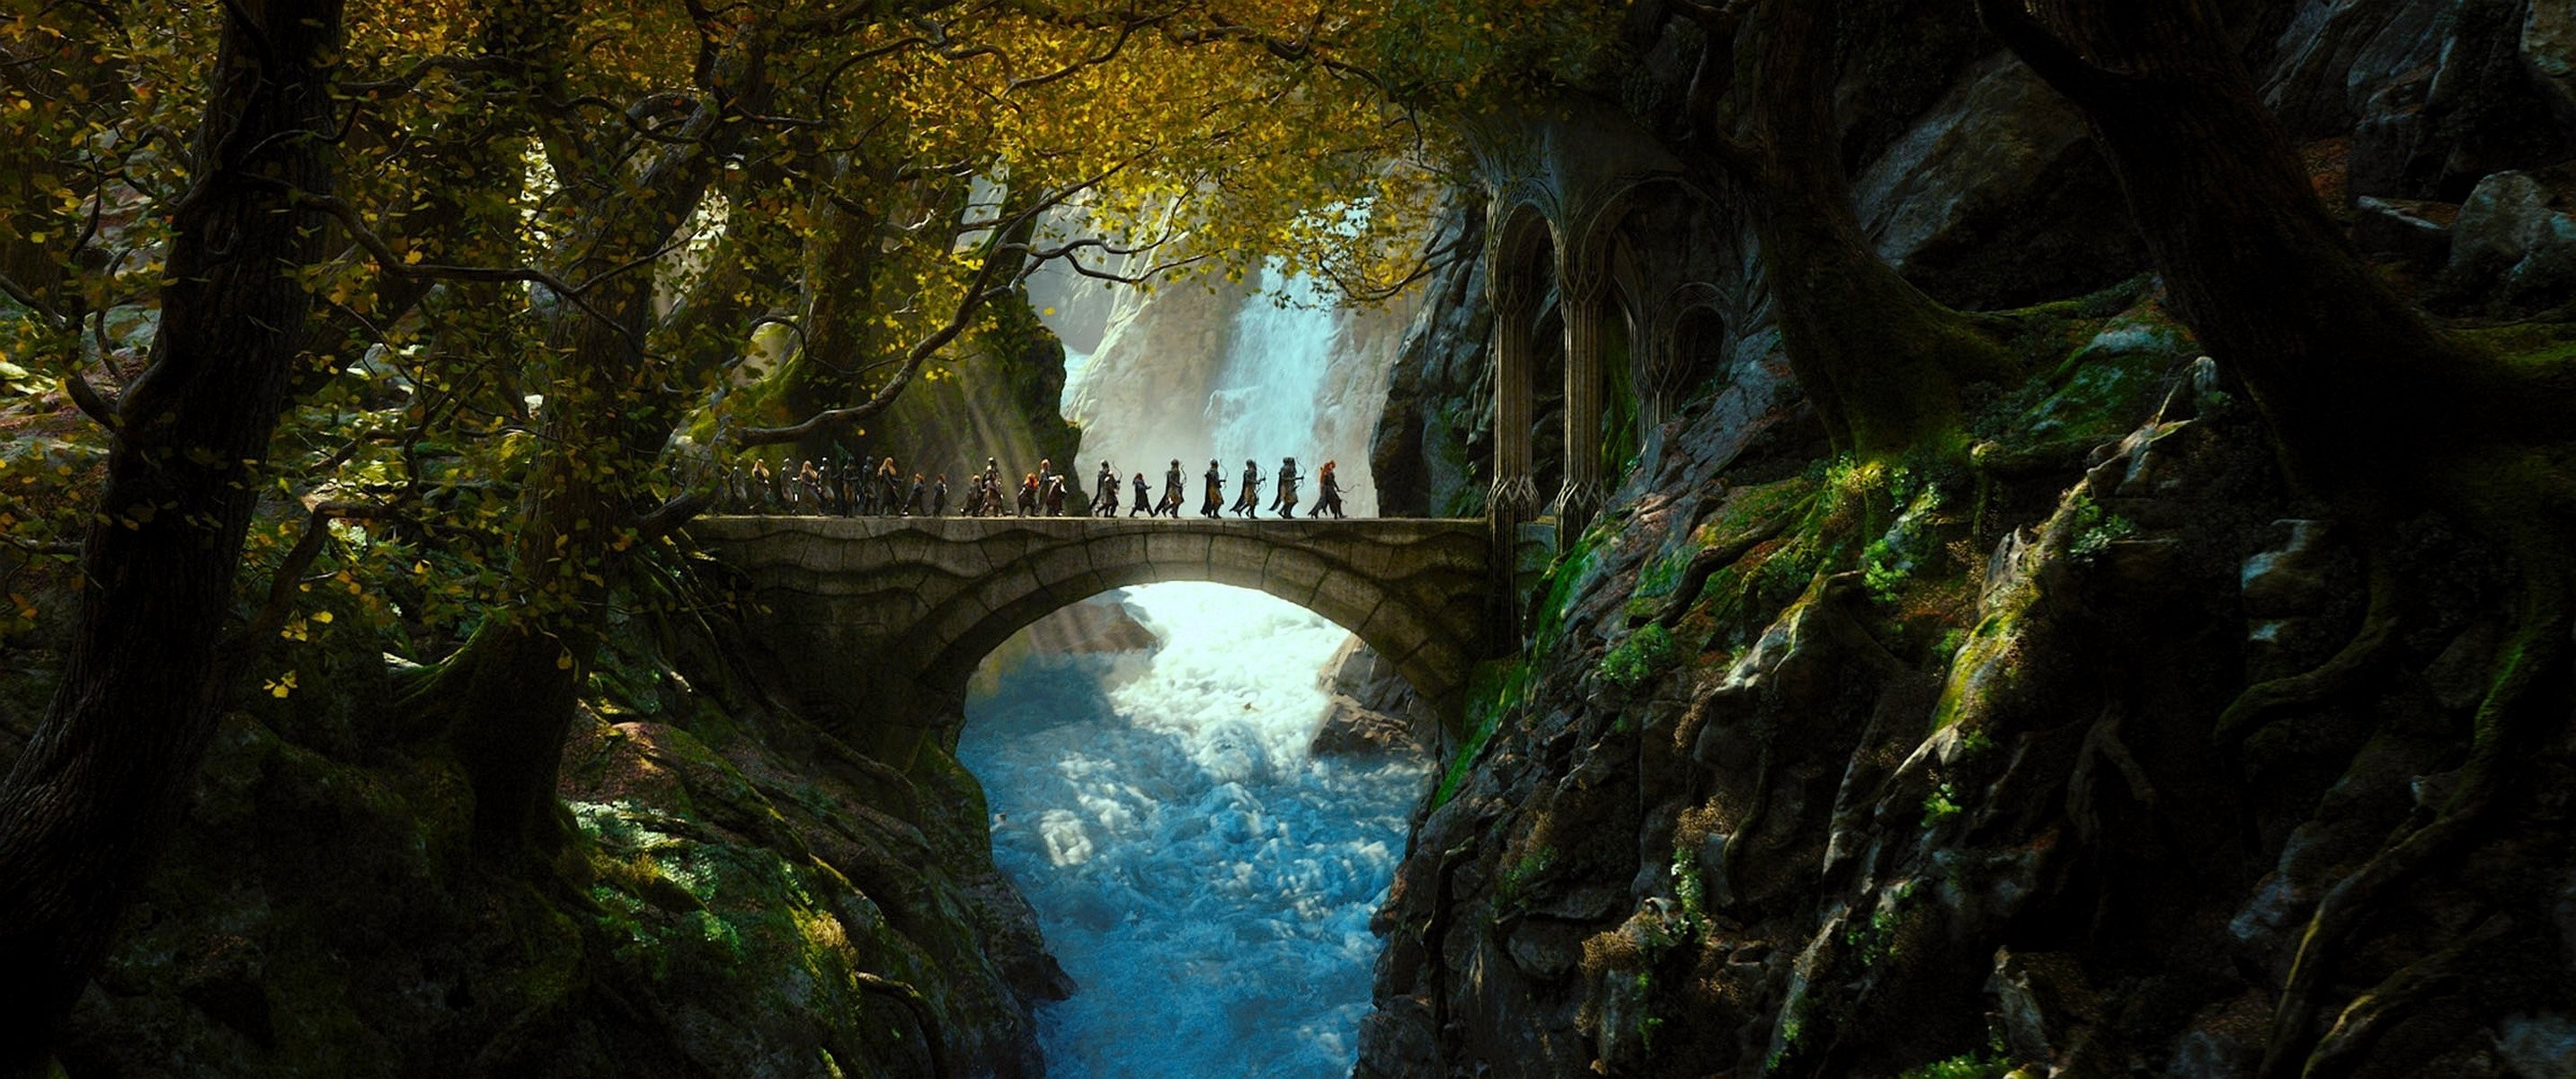 2866x1200 the hobbit or there and back again the hobbit: the desolation of smaug  mirkwood elves